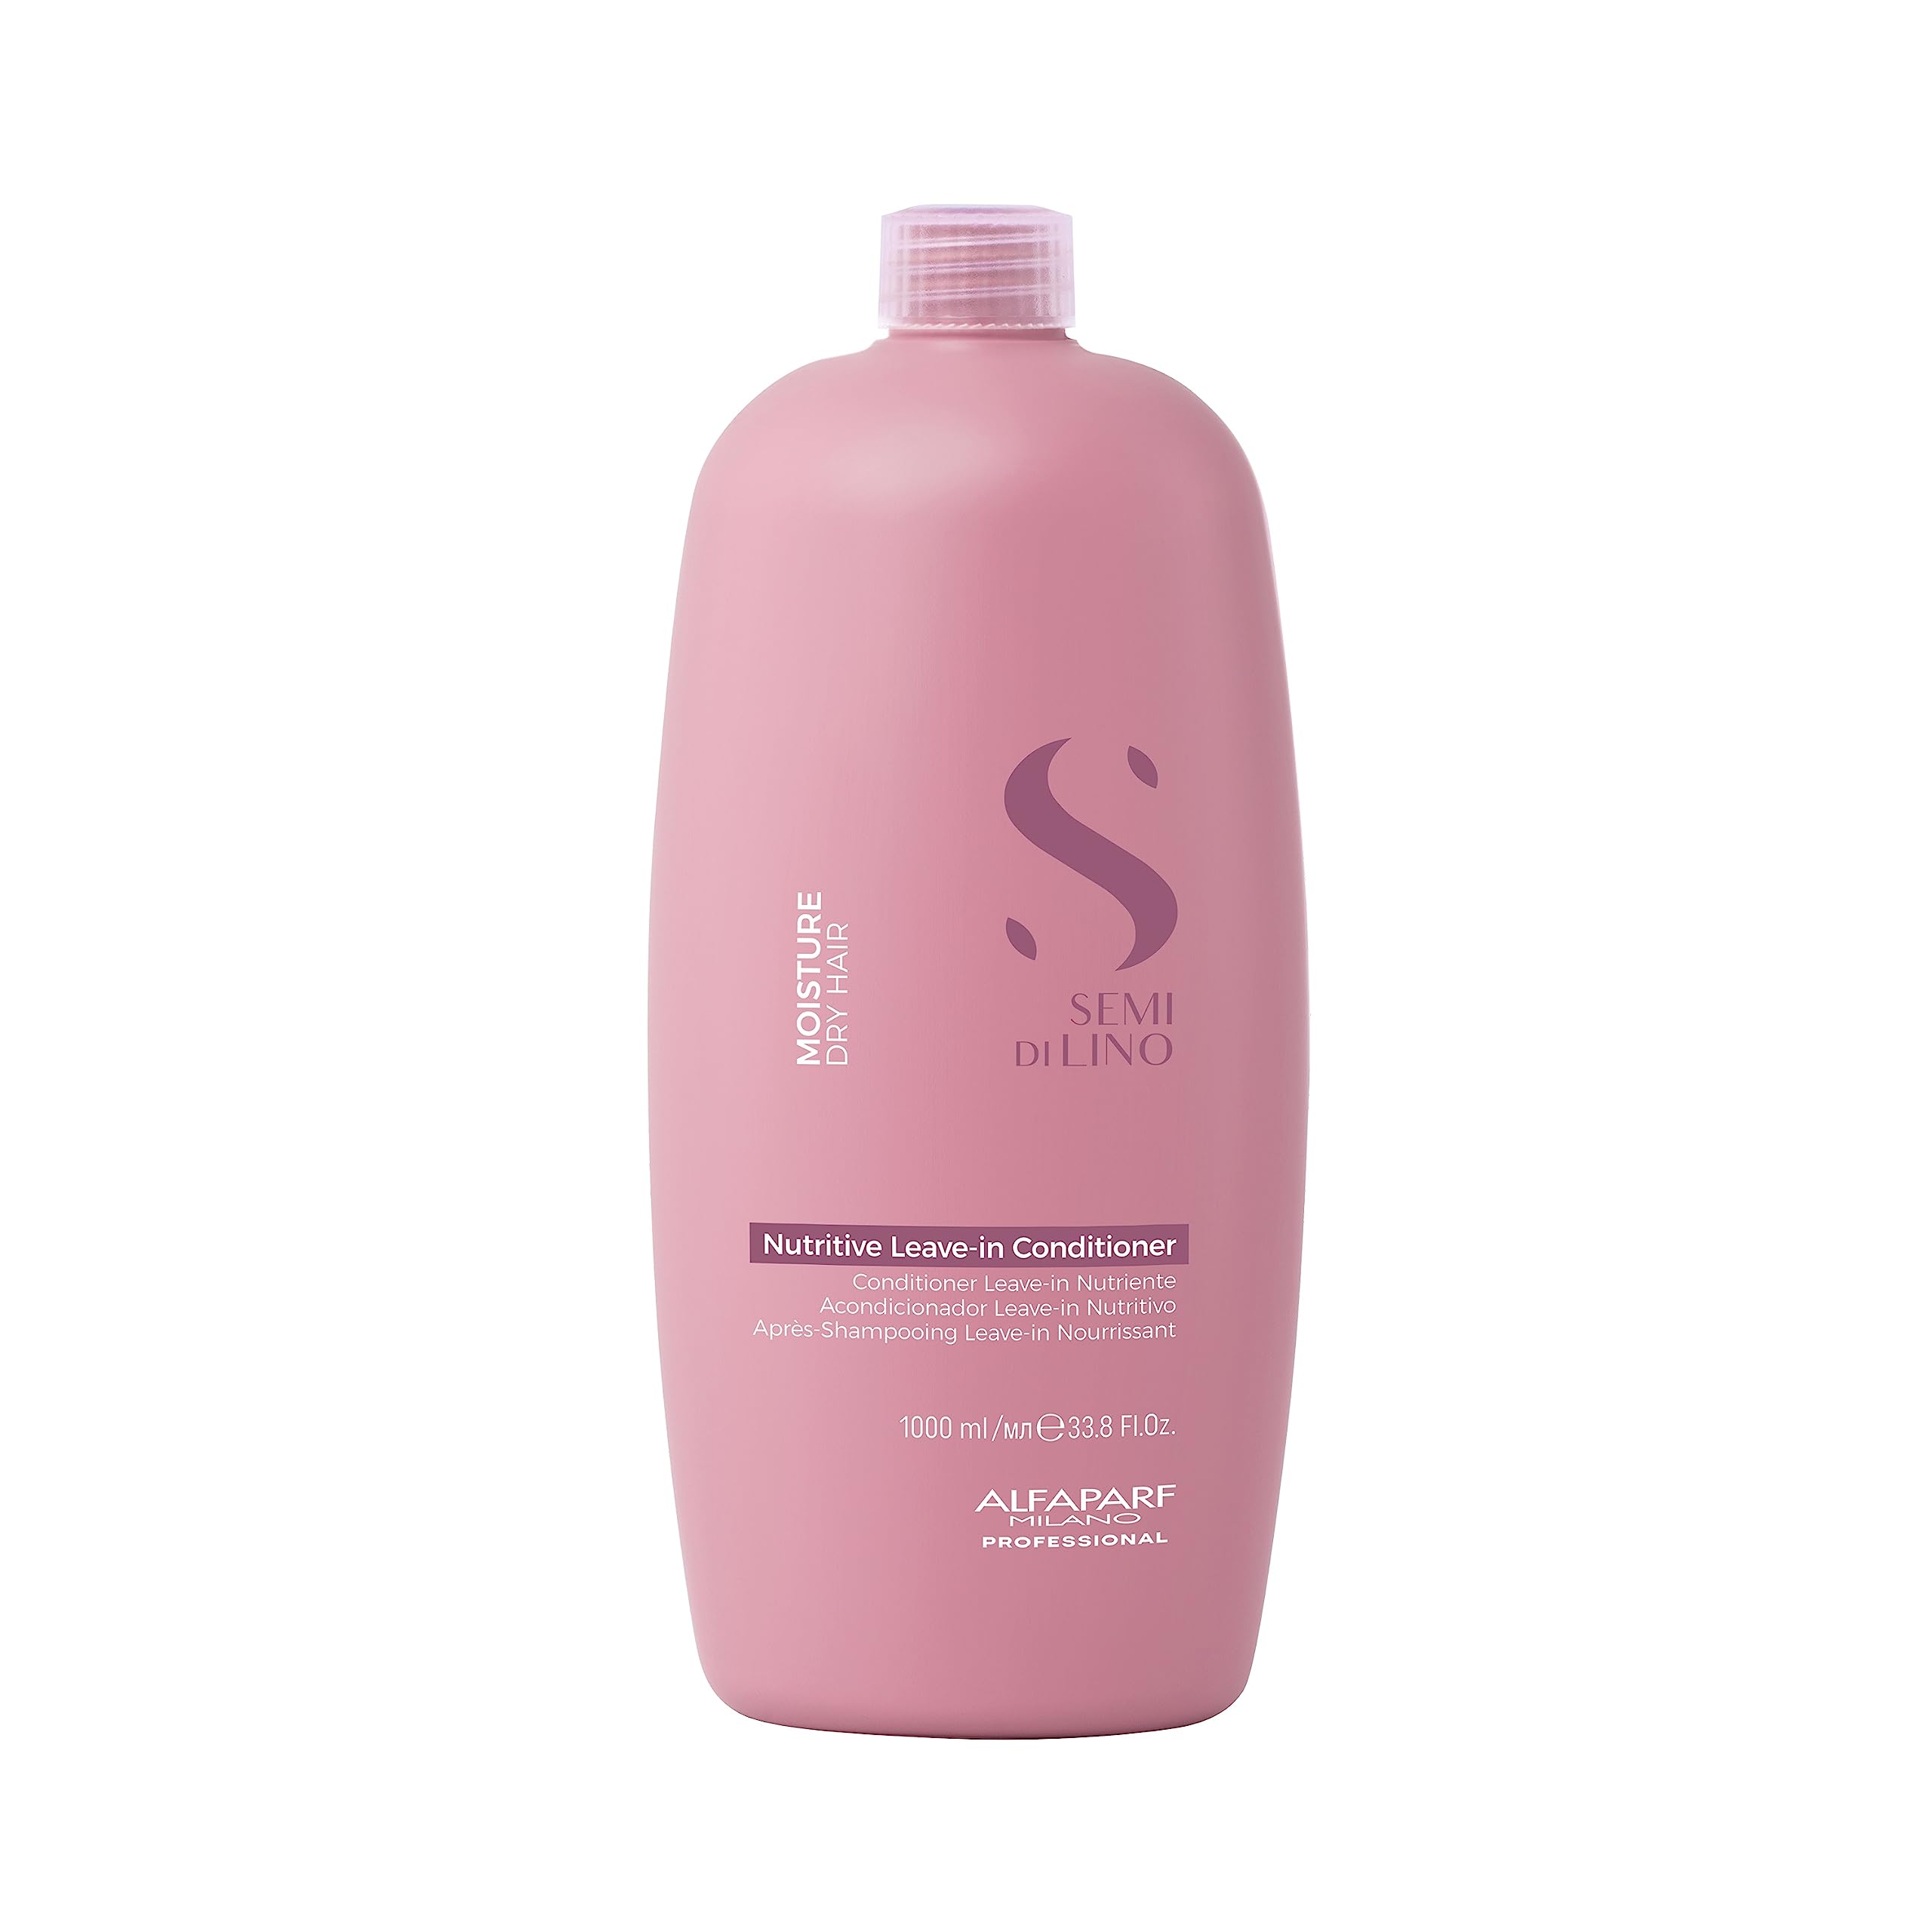 Alfaparf Milano Semi Di Lino Moisture Nutritive Leave-in Sulfate Free Conditioner for Dry Hair - Professional Salon Quality - SLS, Paraben and Paraffin Free - Safe on Color Treated Hair